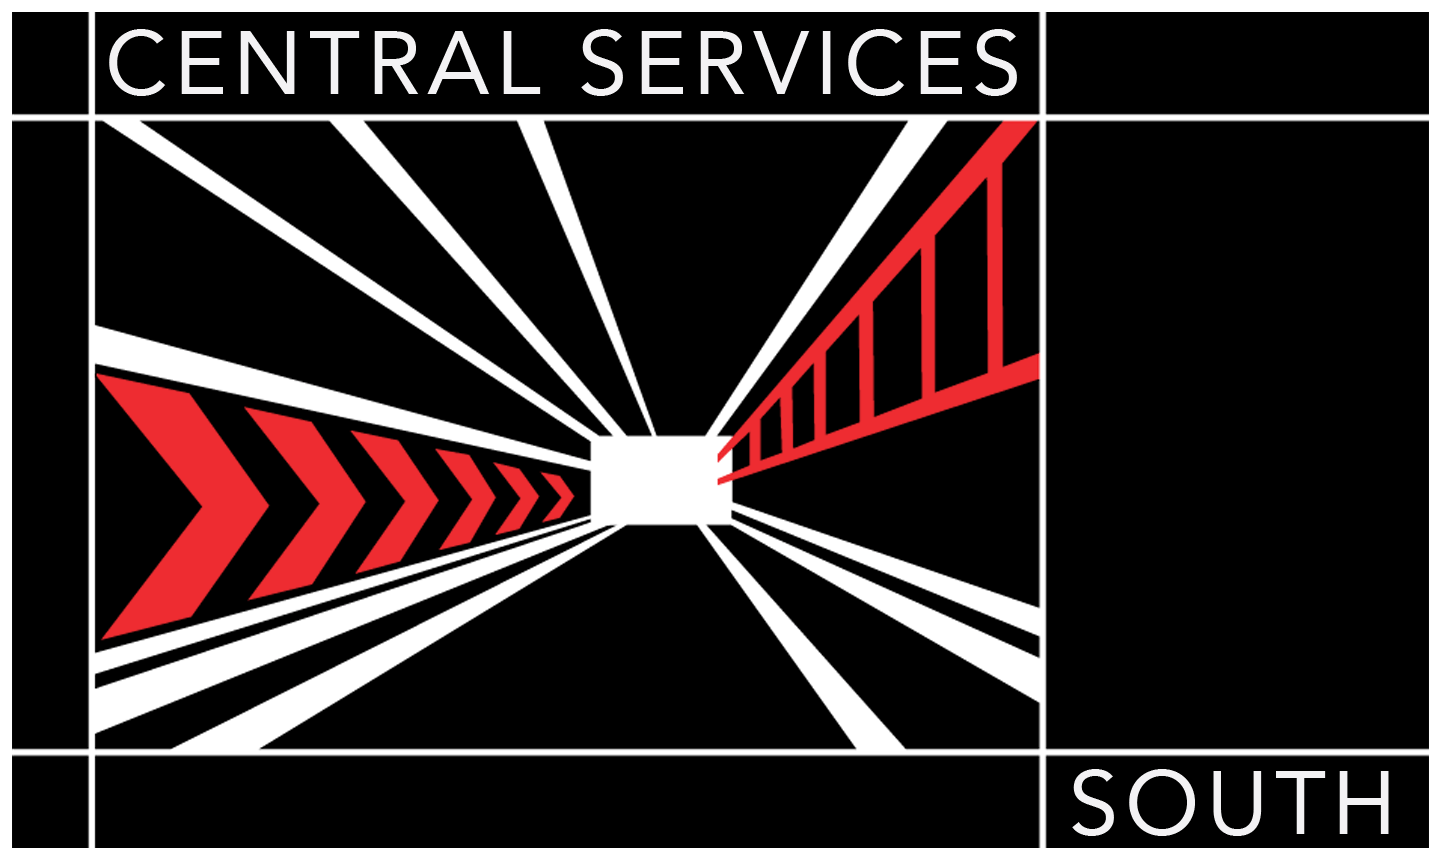 Central Services South